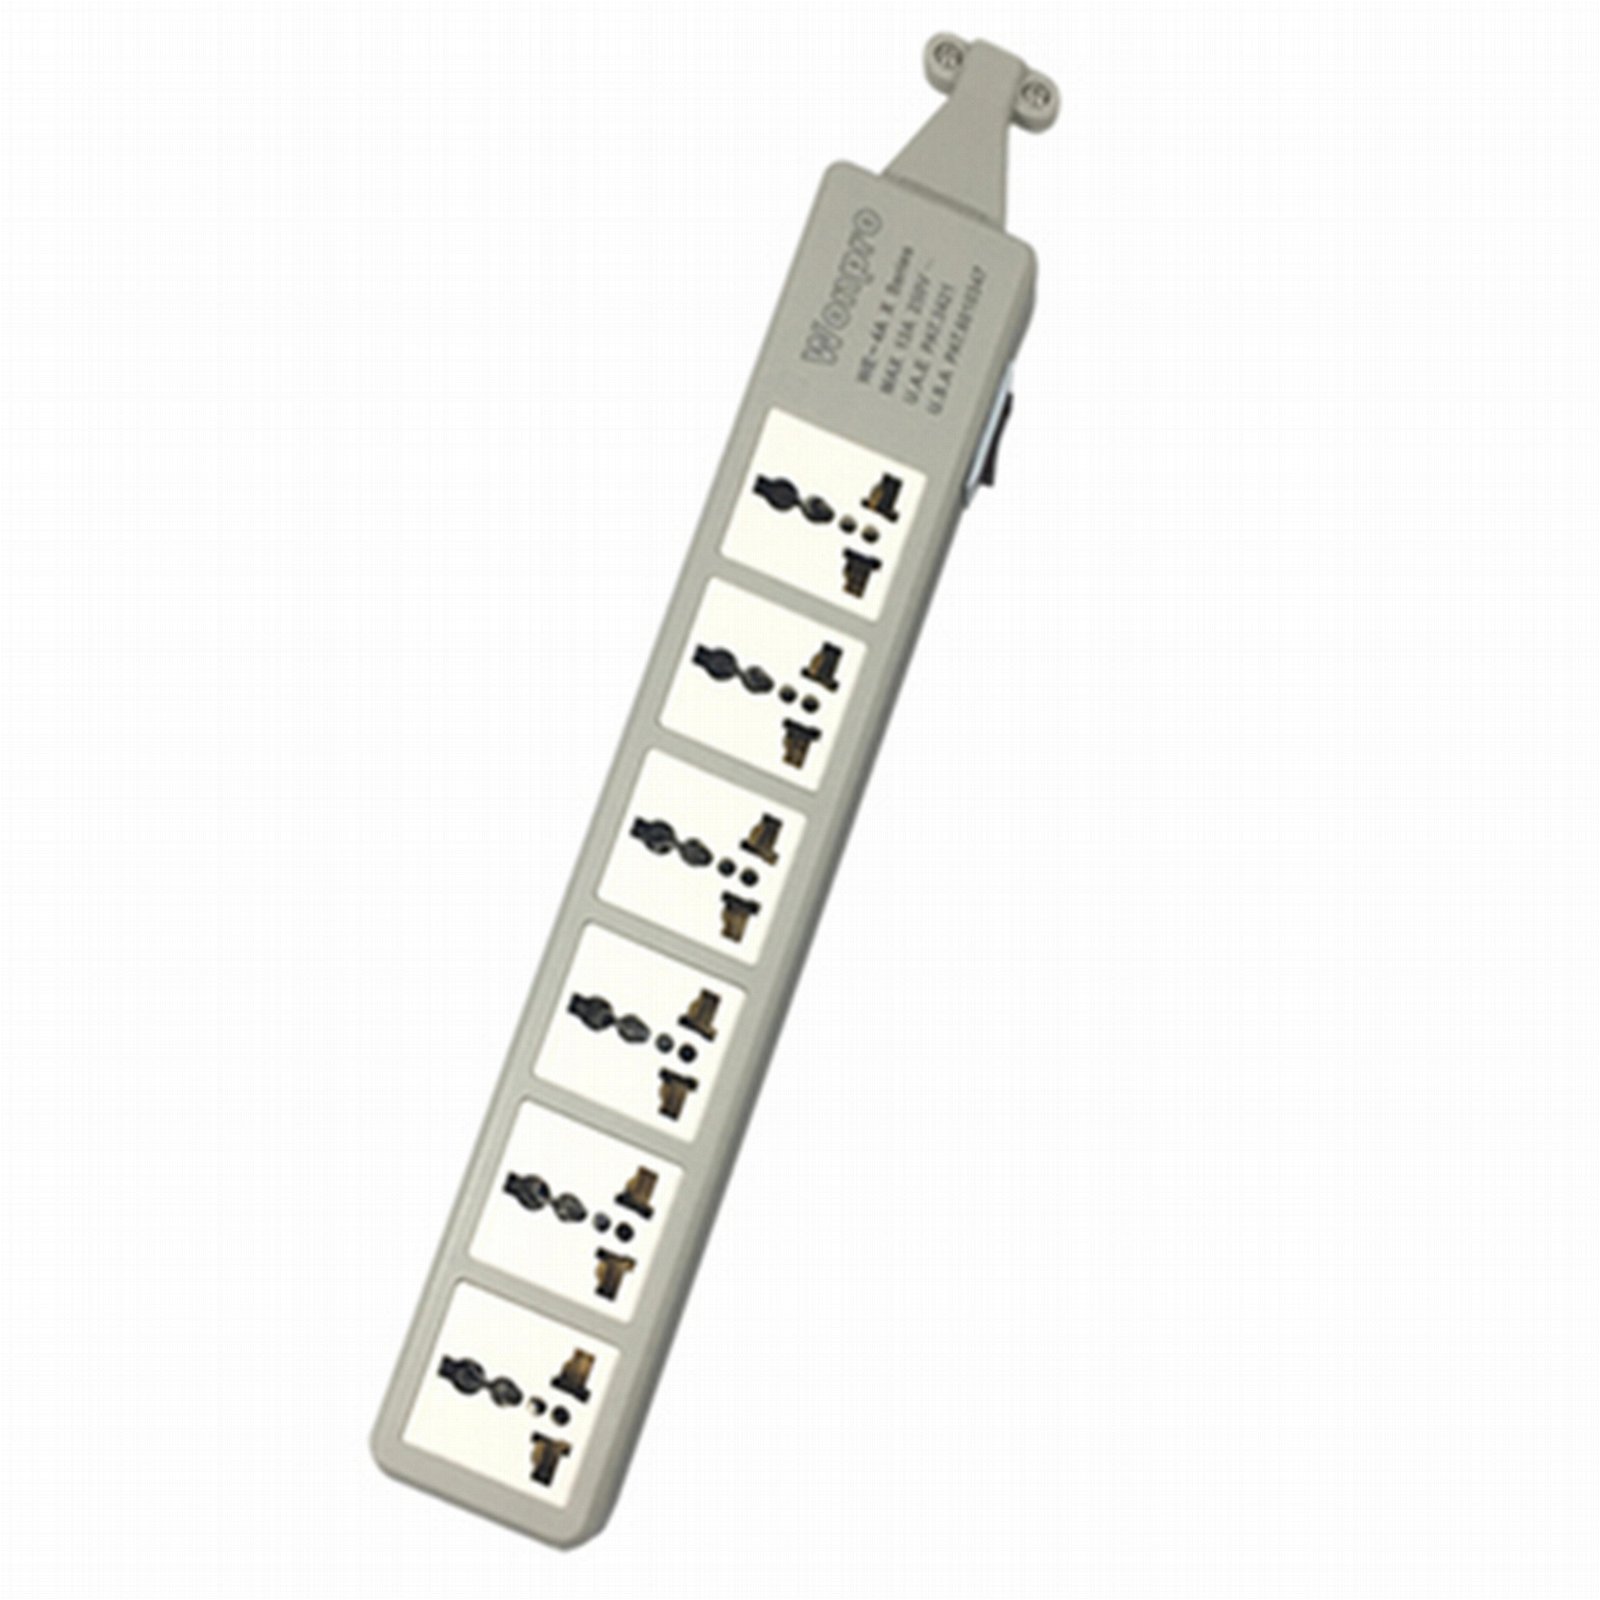 6 gang Universal Sockets Extension with side switch 5